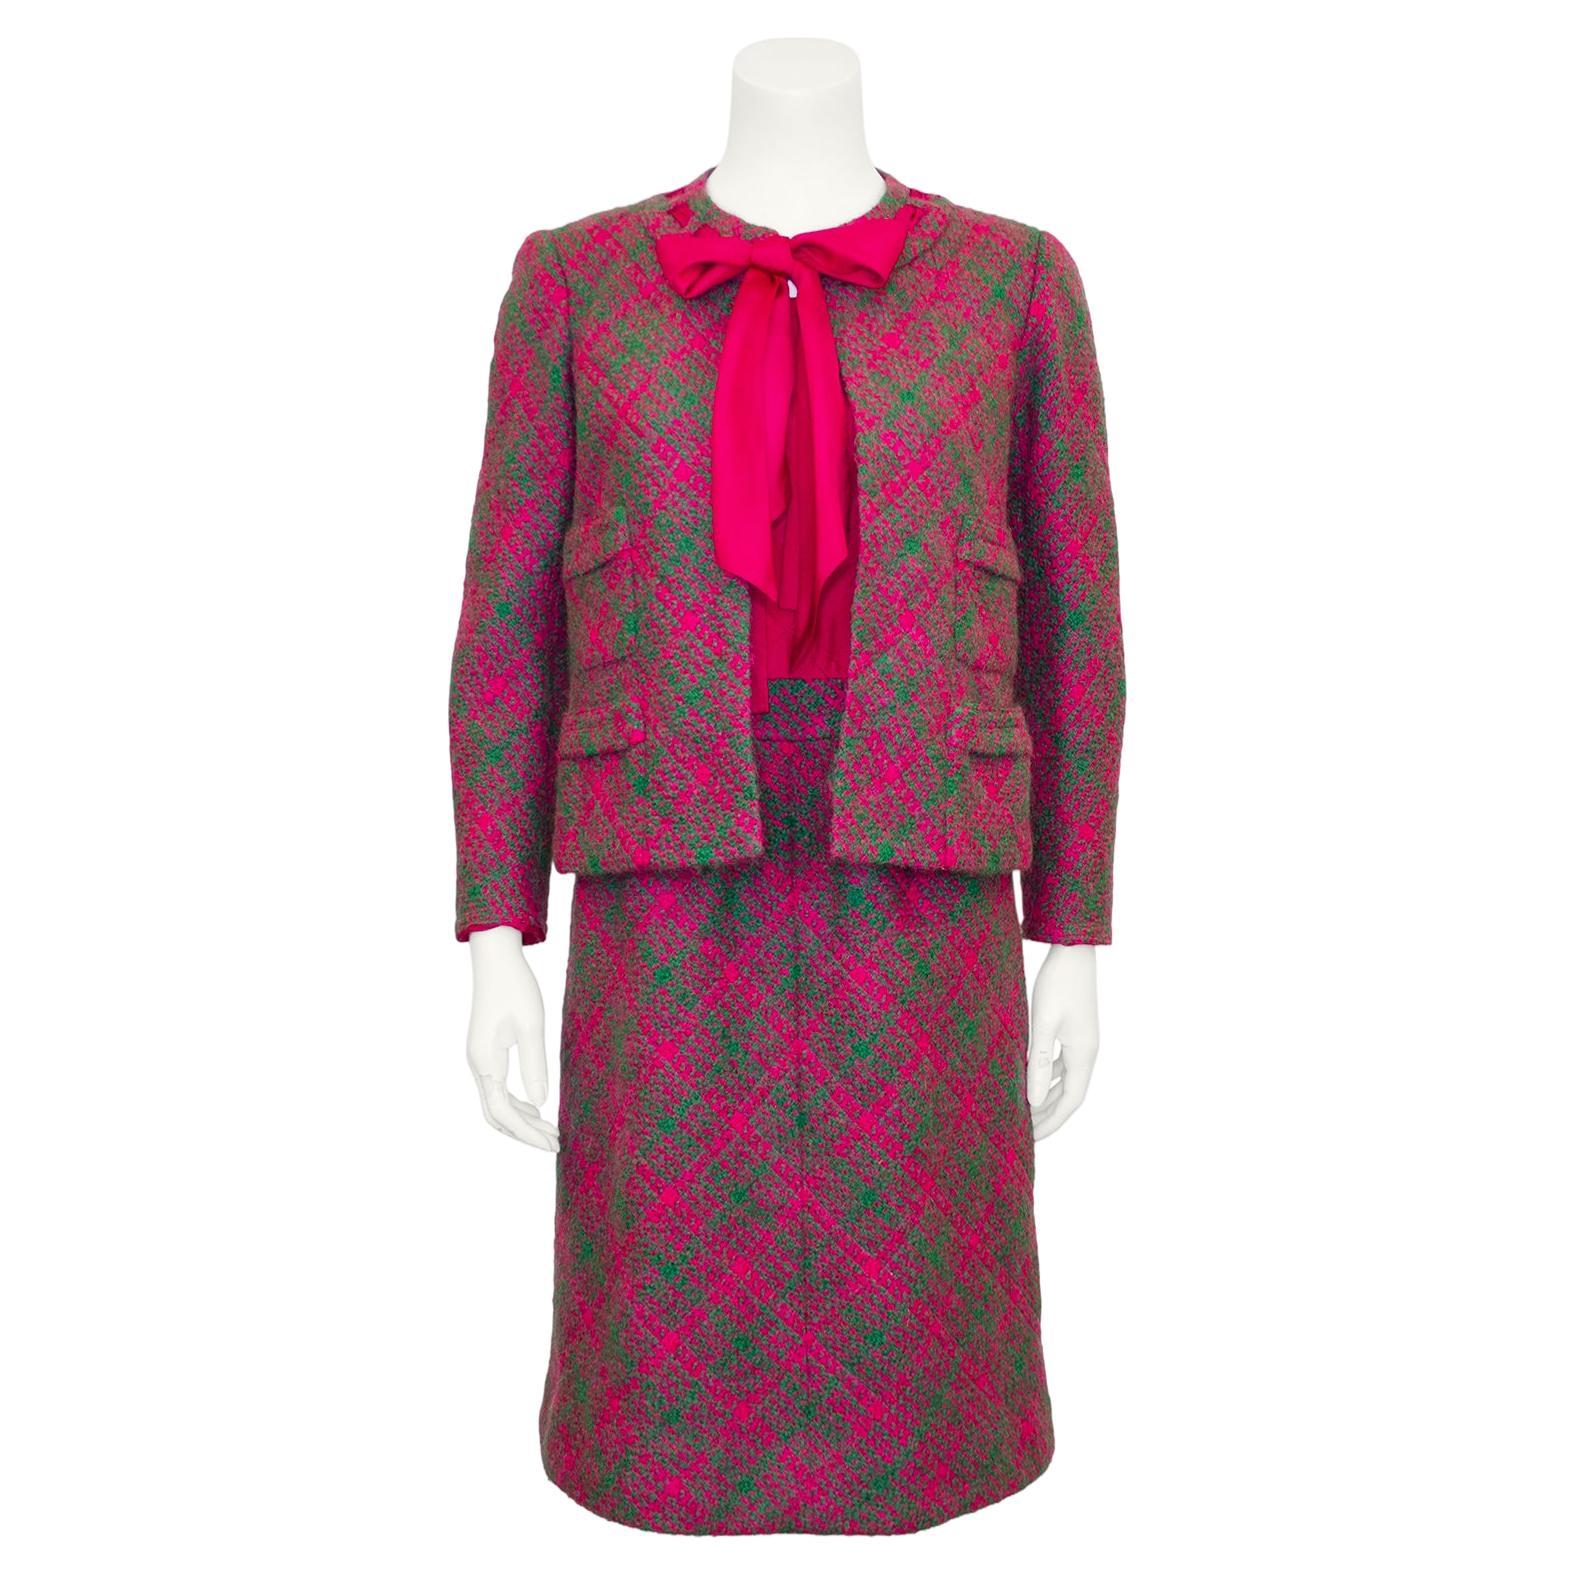 1960s Chanel Haute Couture Magenta and Green Dress and Jacket Ensemble For Sale